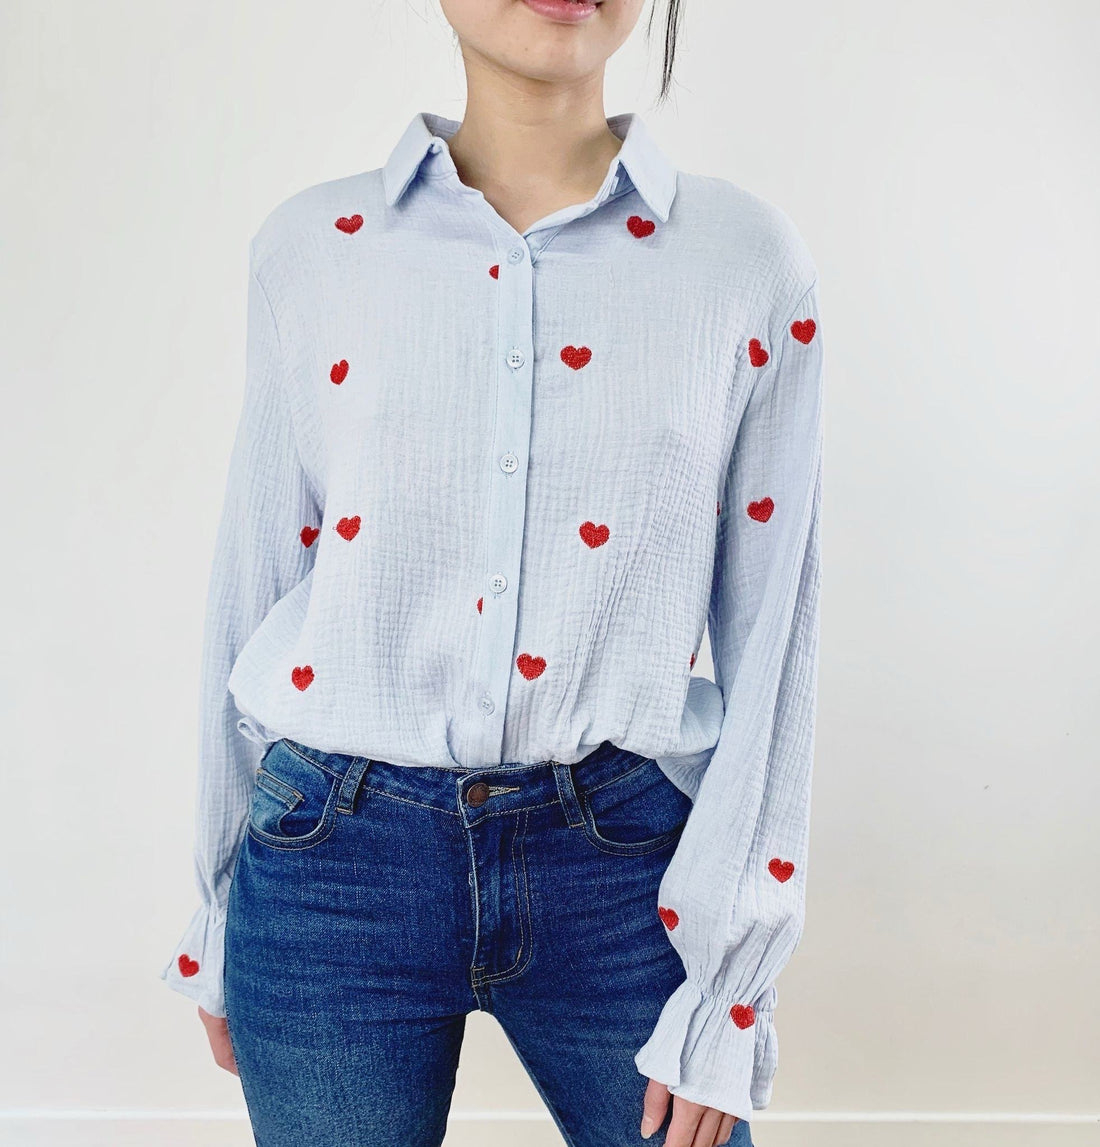 Heart embroided blouse